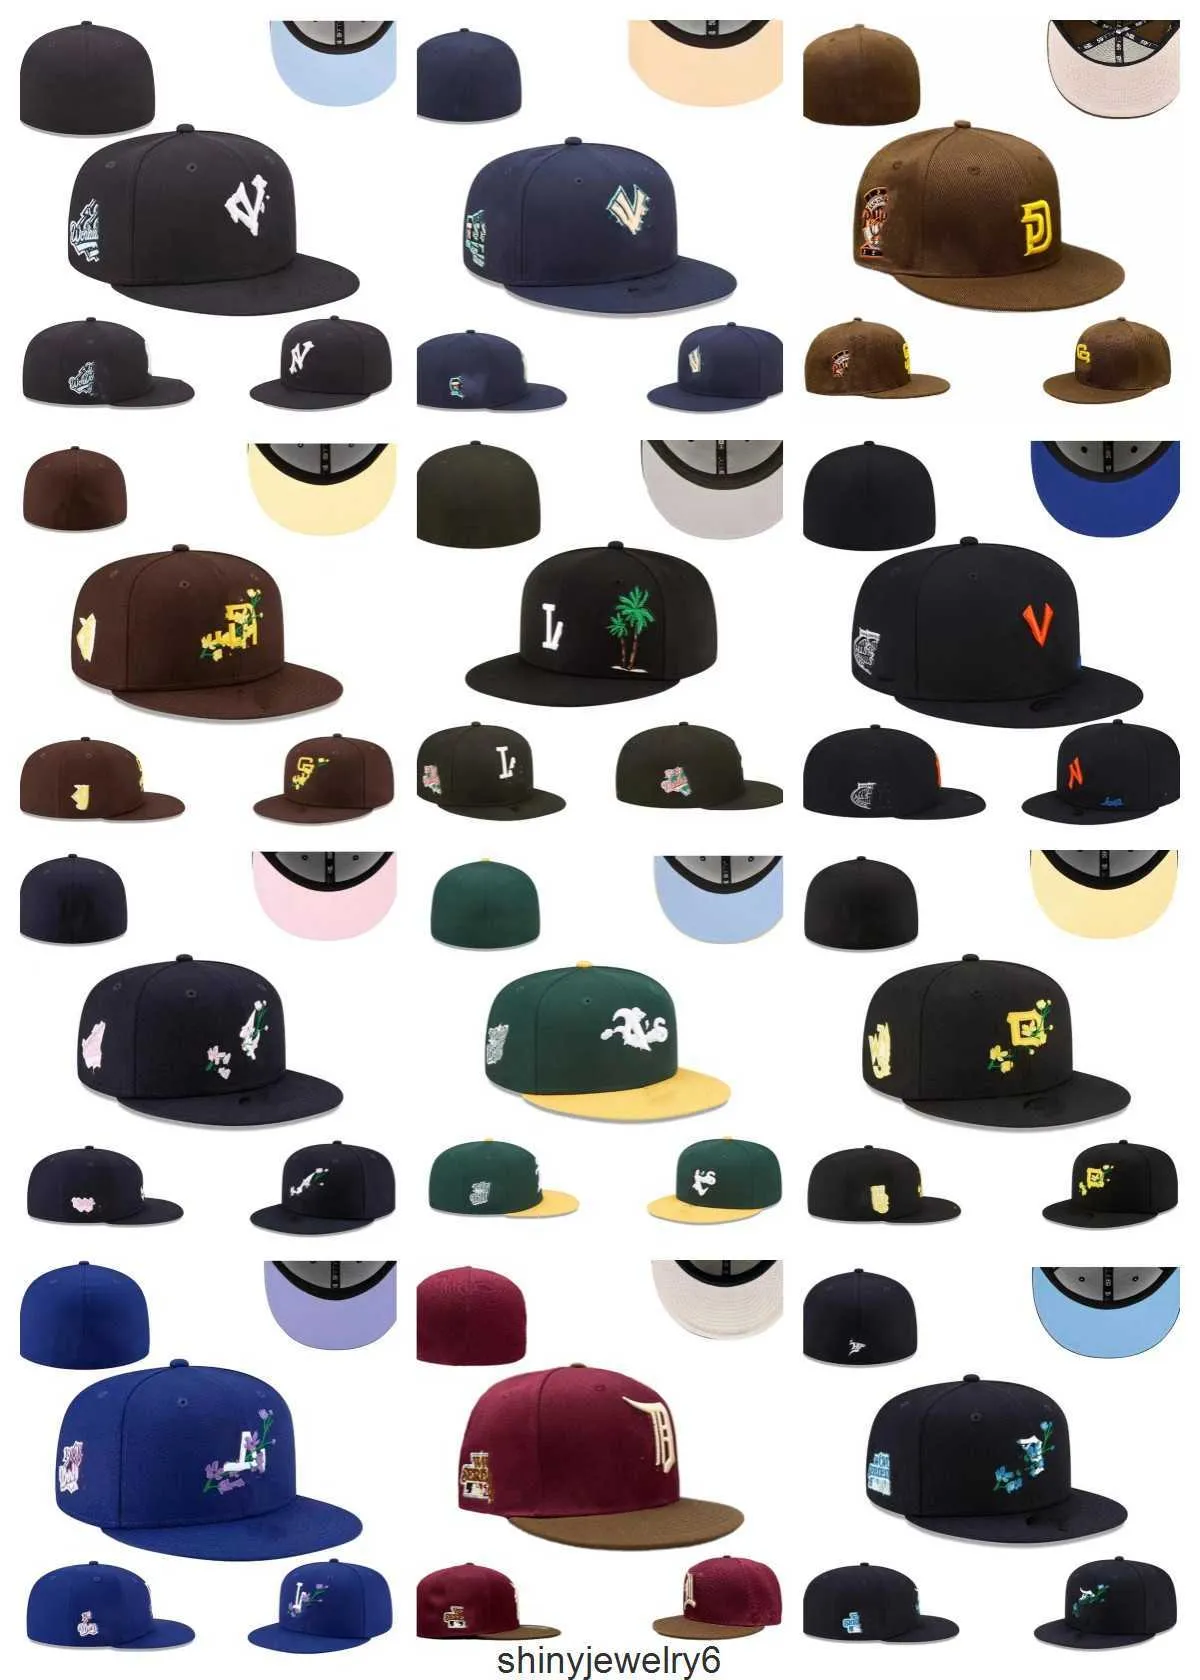 Fitted hats Designer size Newest Colors Baseball Flat Caps Brown Black Color letter Embroidery Chicago All Teams Sport World Patched Full Closed stitched hats